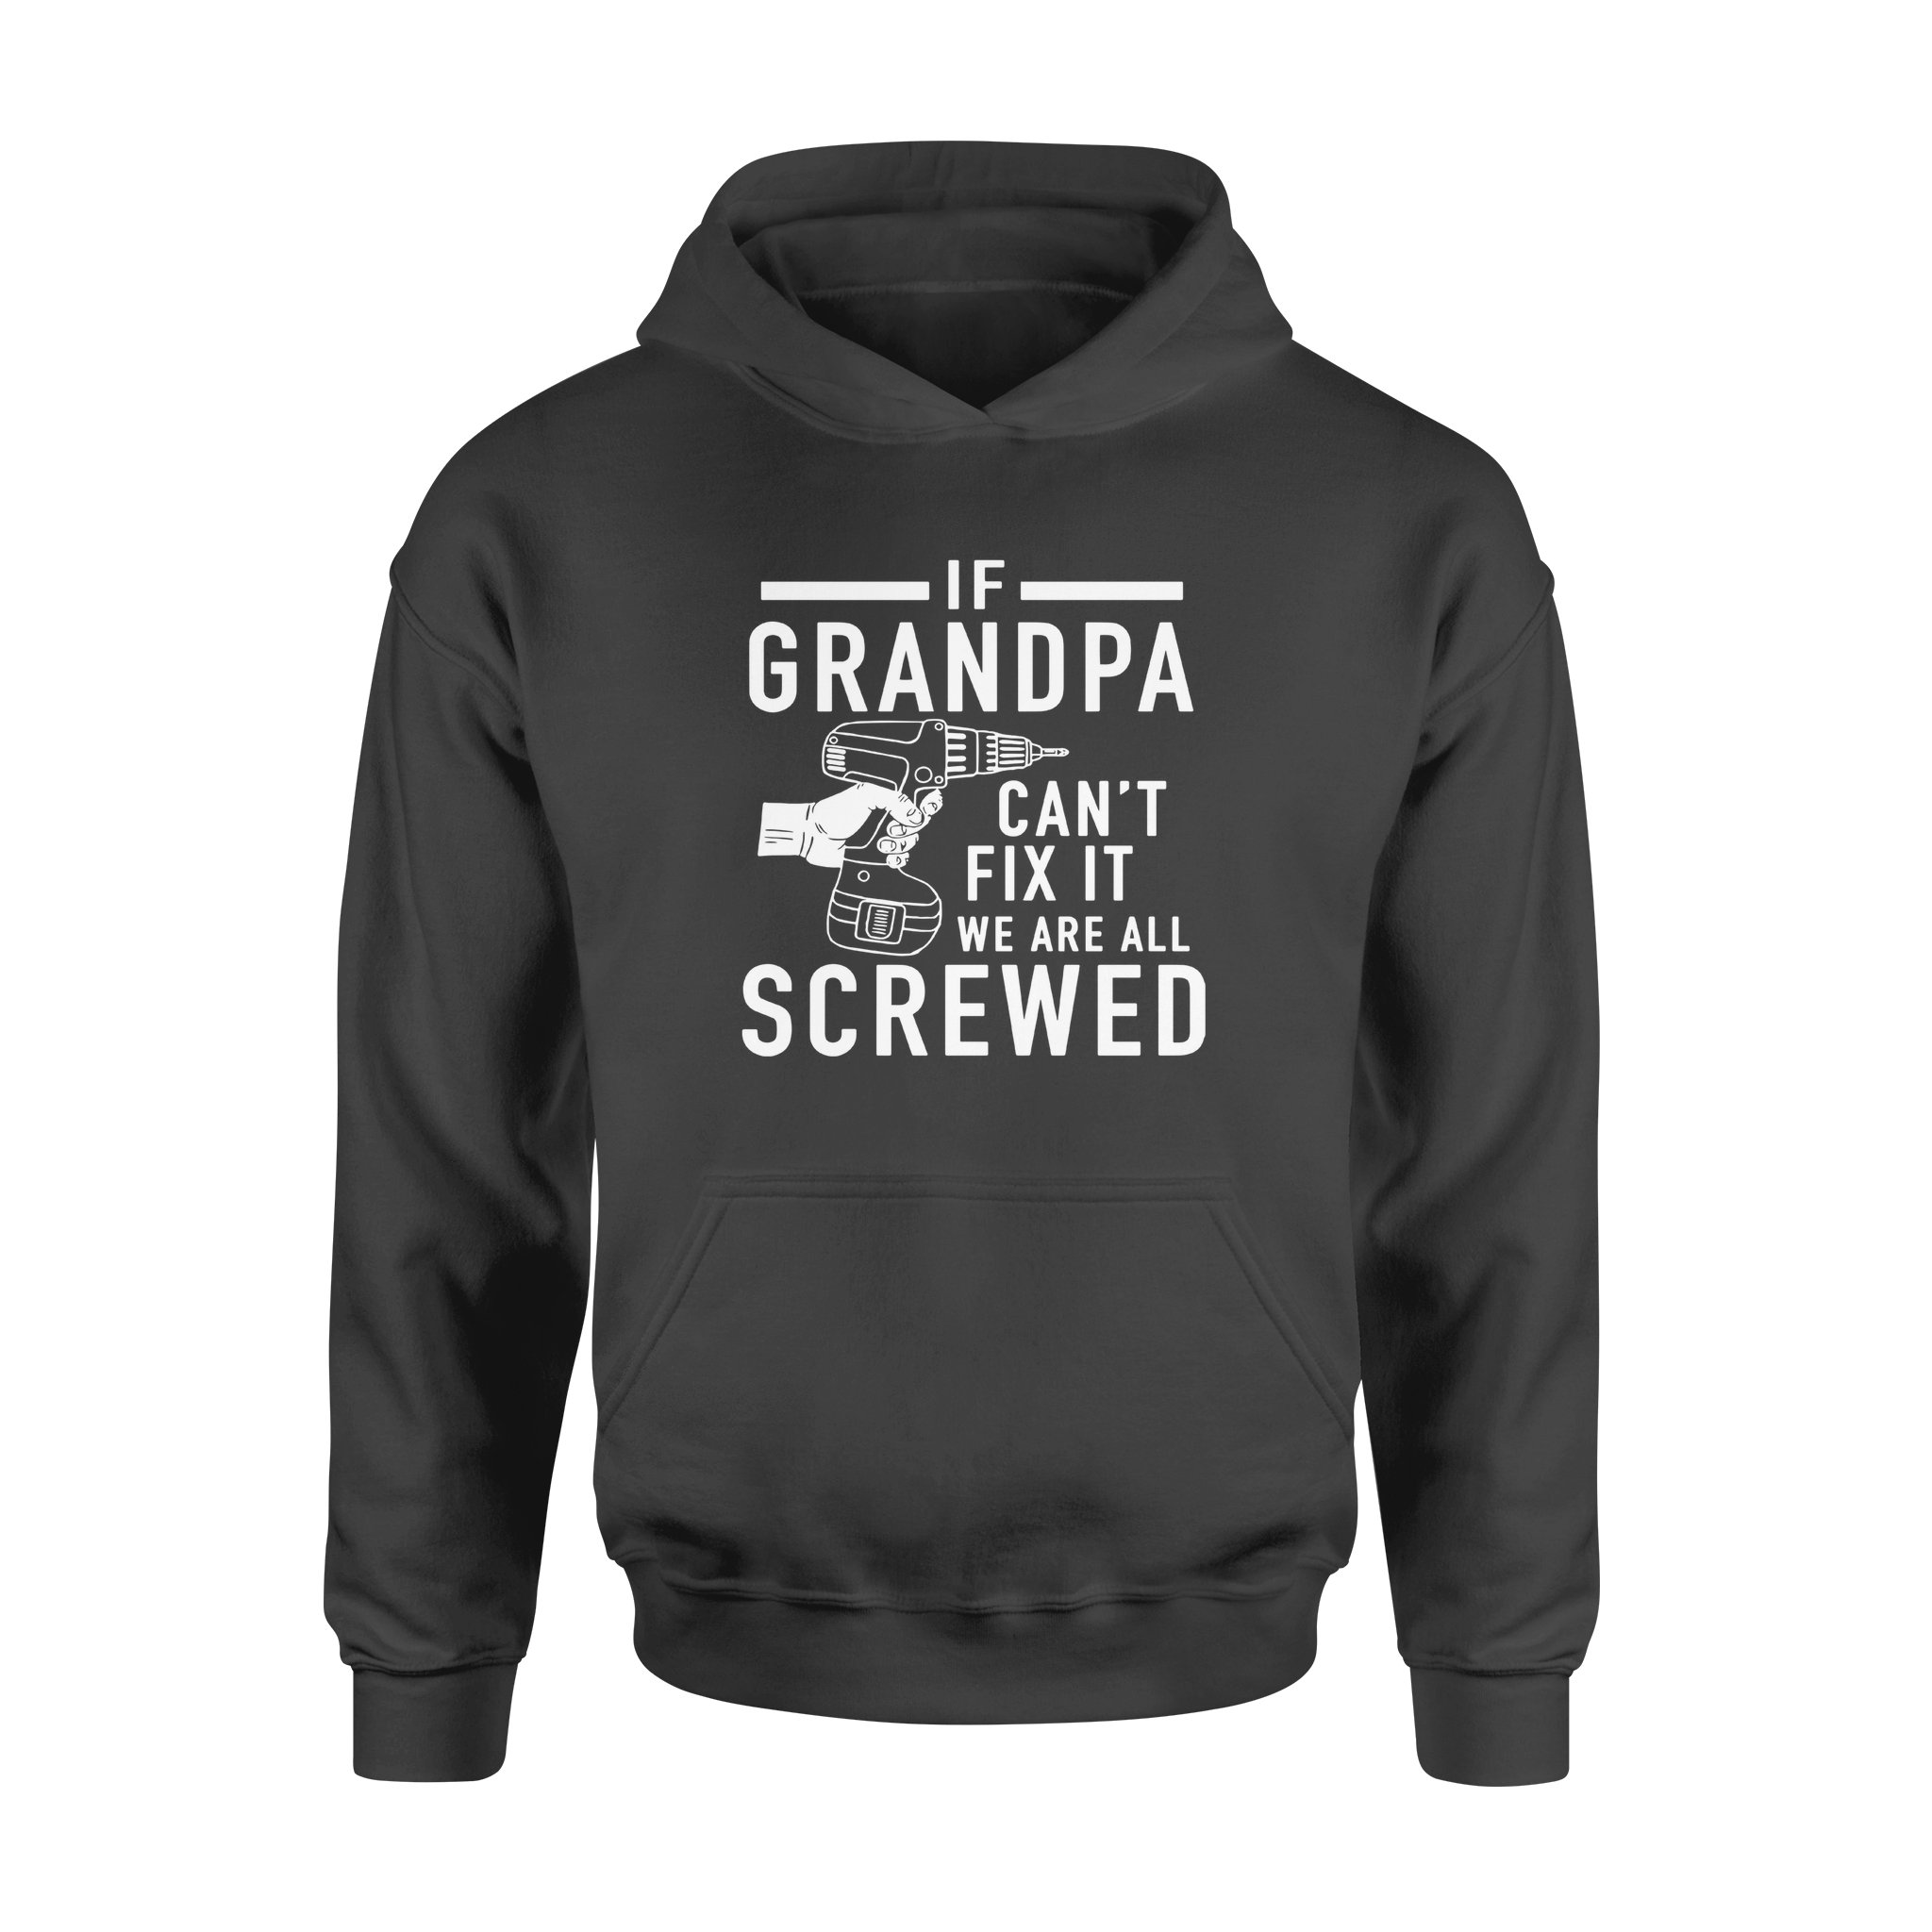 IF GRANDPA CAN?T FIX IT WE ARE ALL SCREWED, GIFTS FOR GRANDPA,GRANDPA SHIRT,GRANDPA GIFTS,FATHER?S DAY GIFT,PLUS SIZE SHIRT